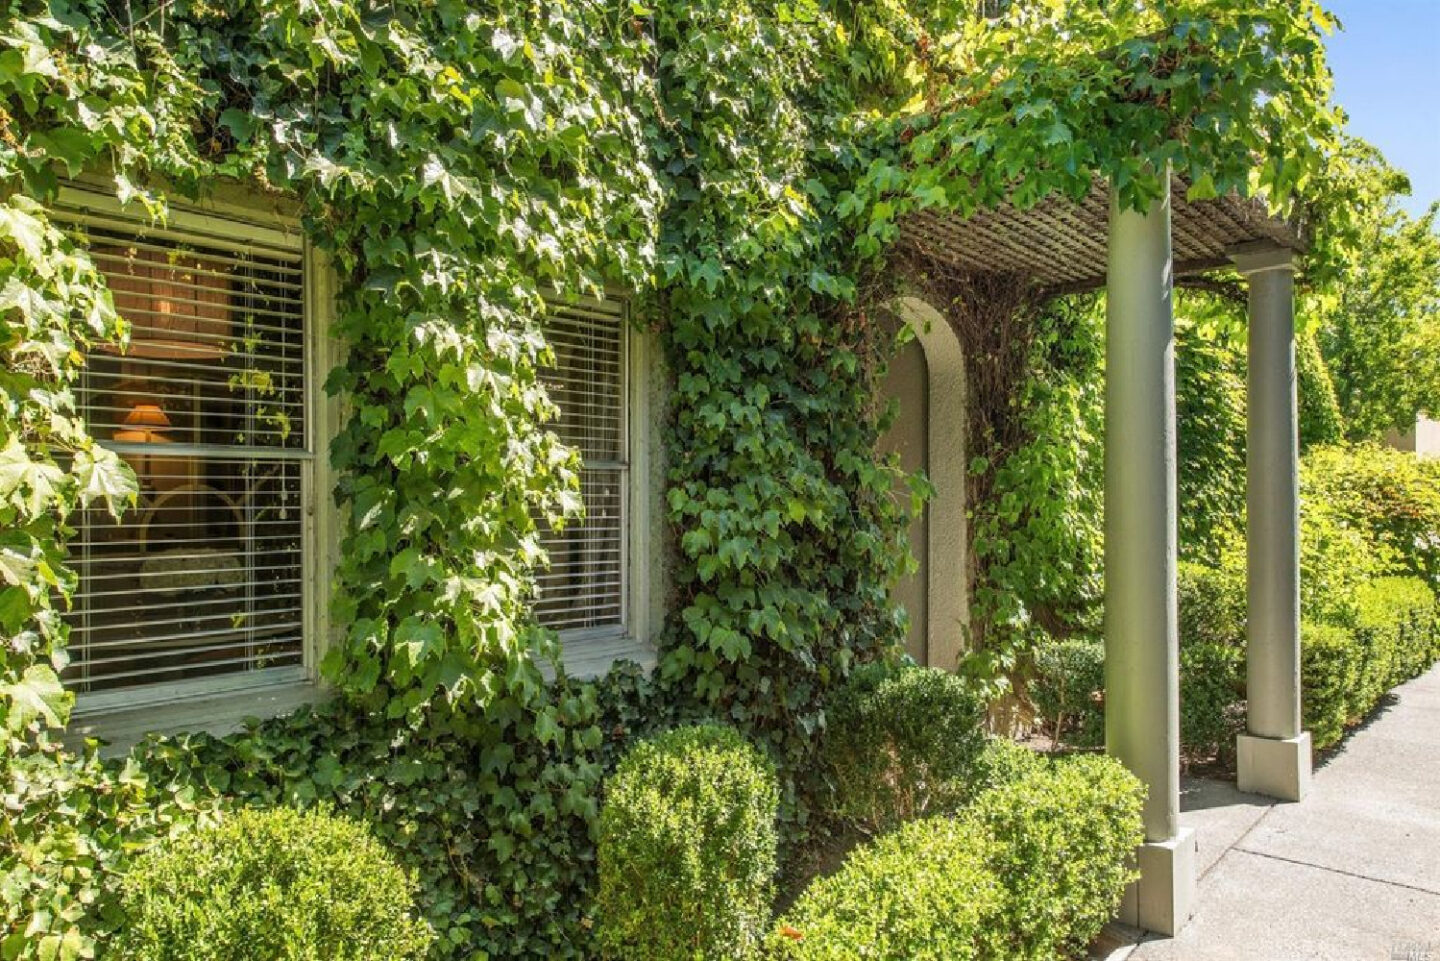 Vine covered exterior of interior designer Myra Hoefer's beautiful 1935 California cottage with Parisian interiors and French inspired gardens.